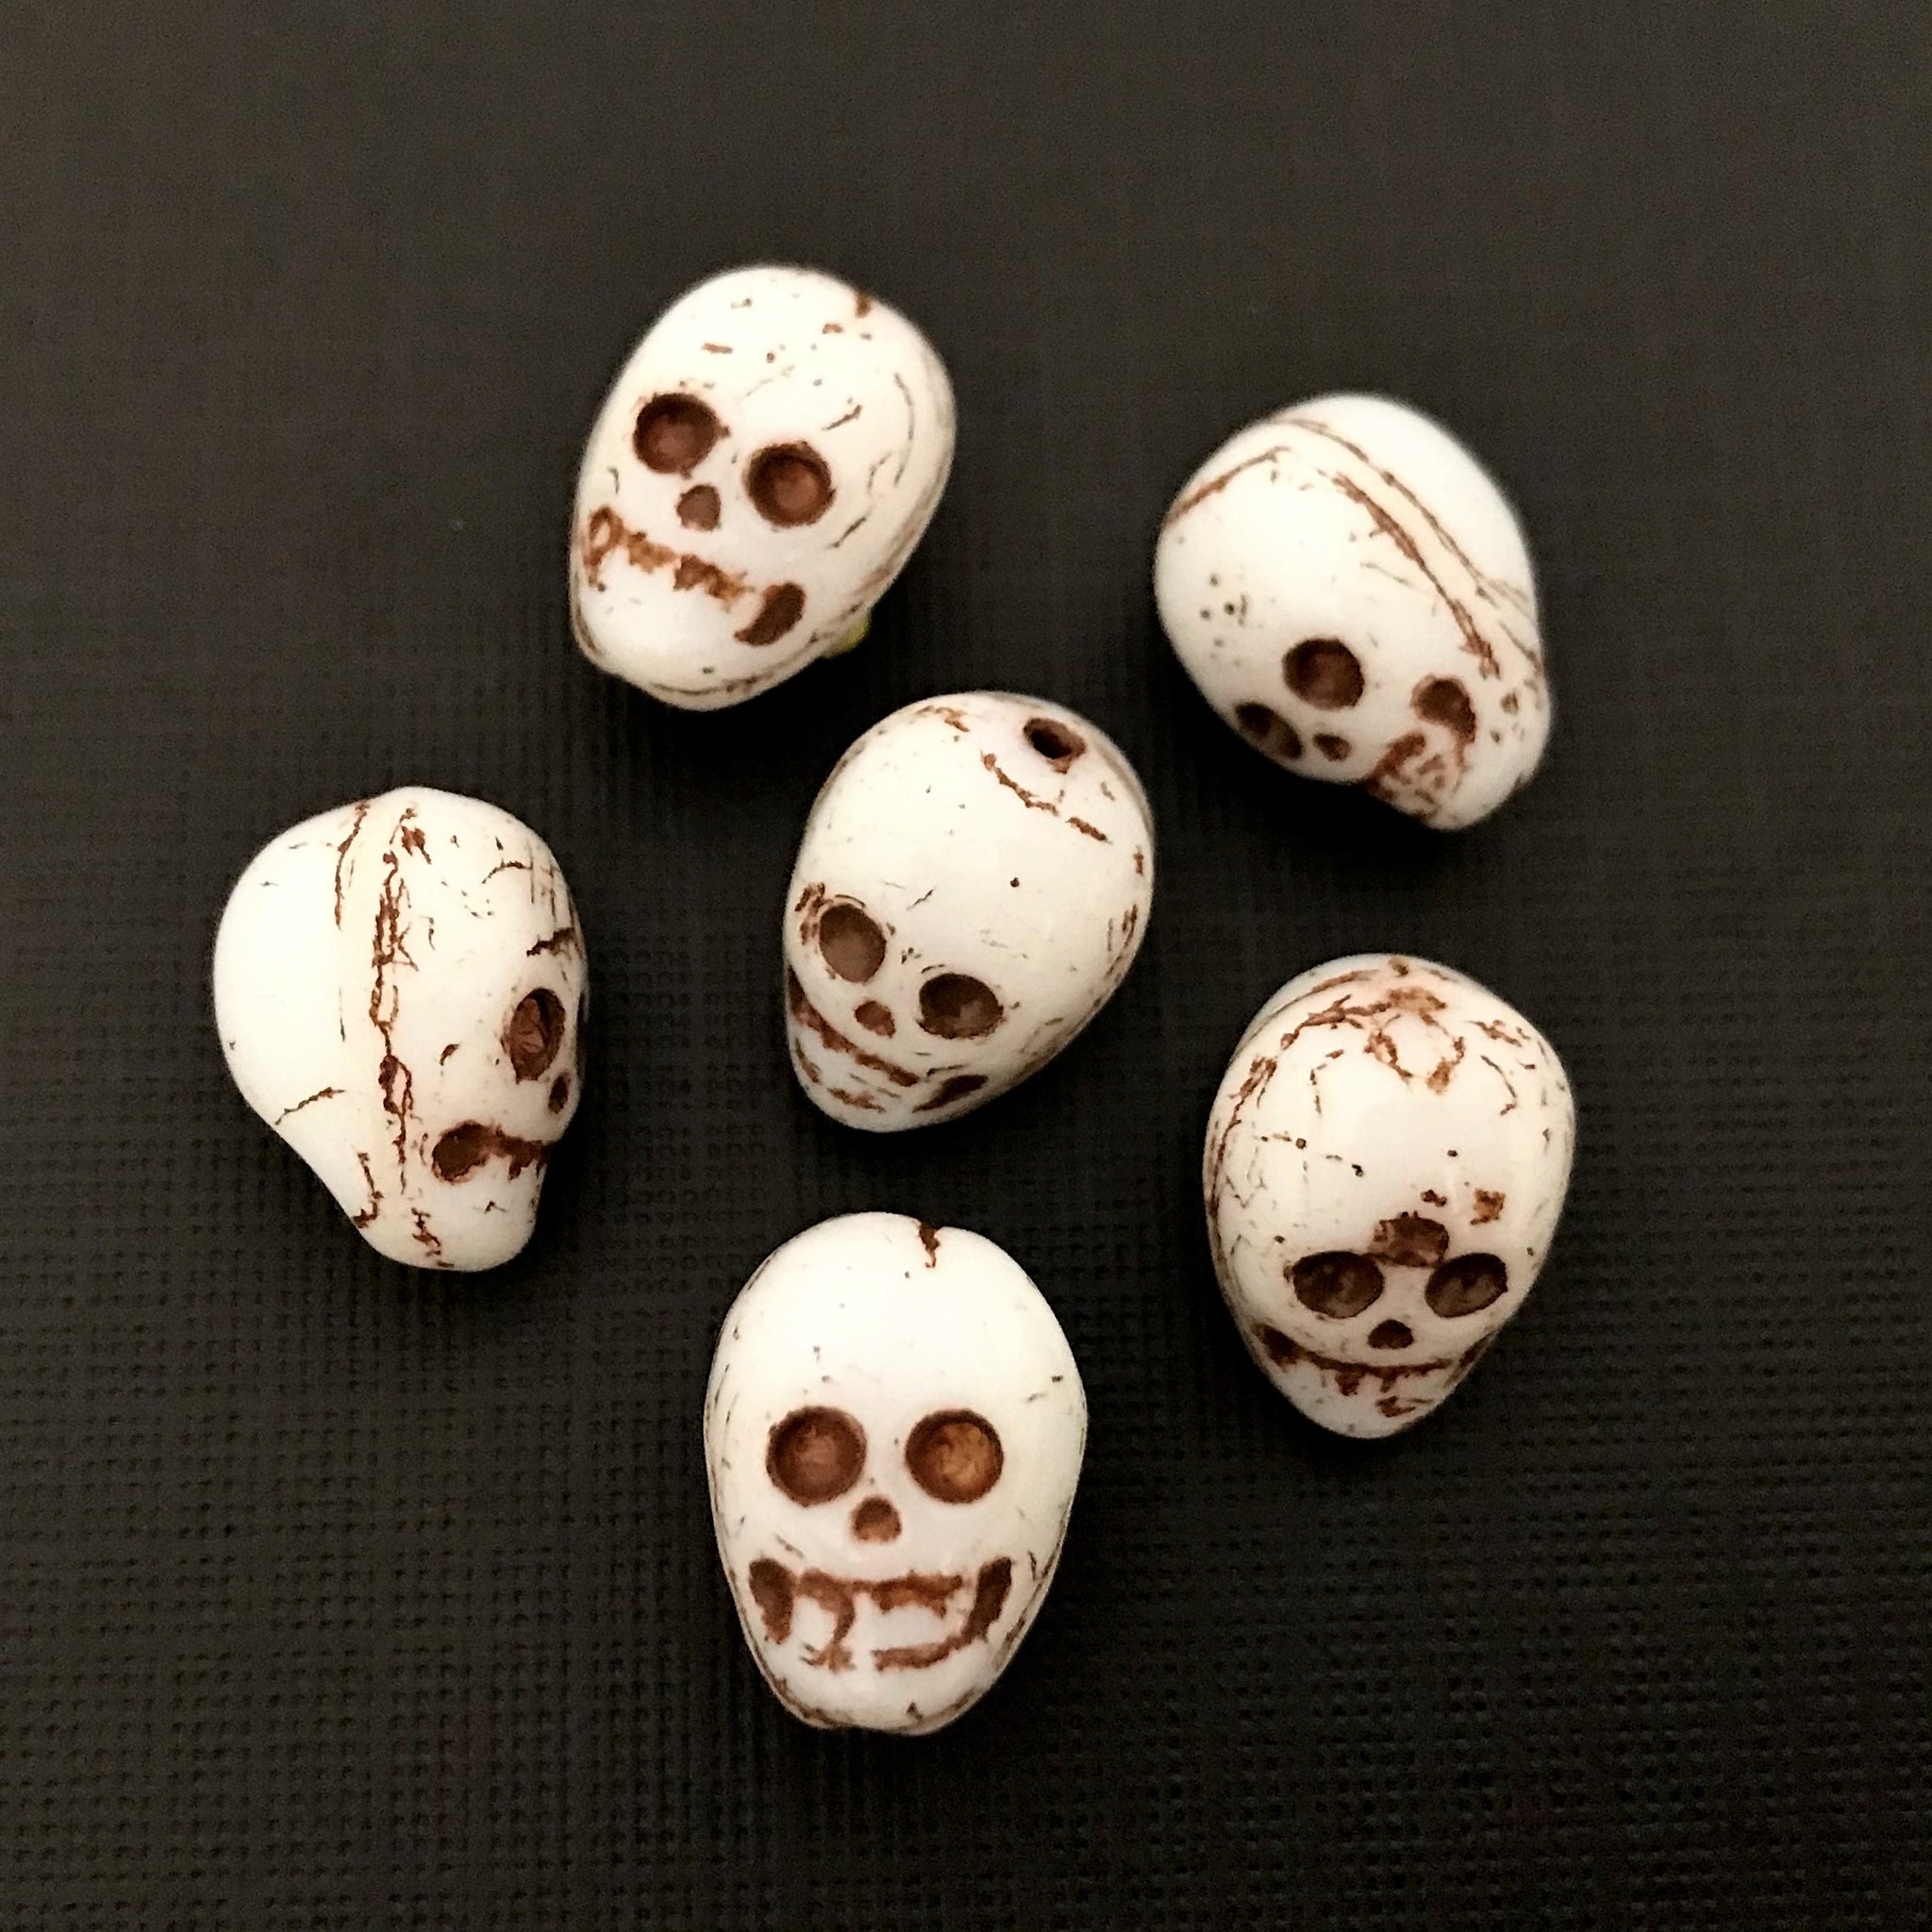 Czech glass skull beads 6pc opaque white with brown decor 14mm – Orange  Grove Beads